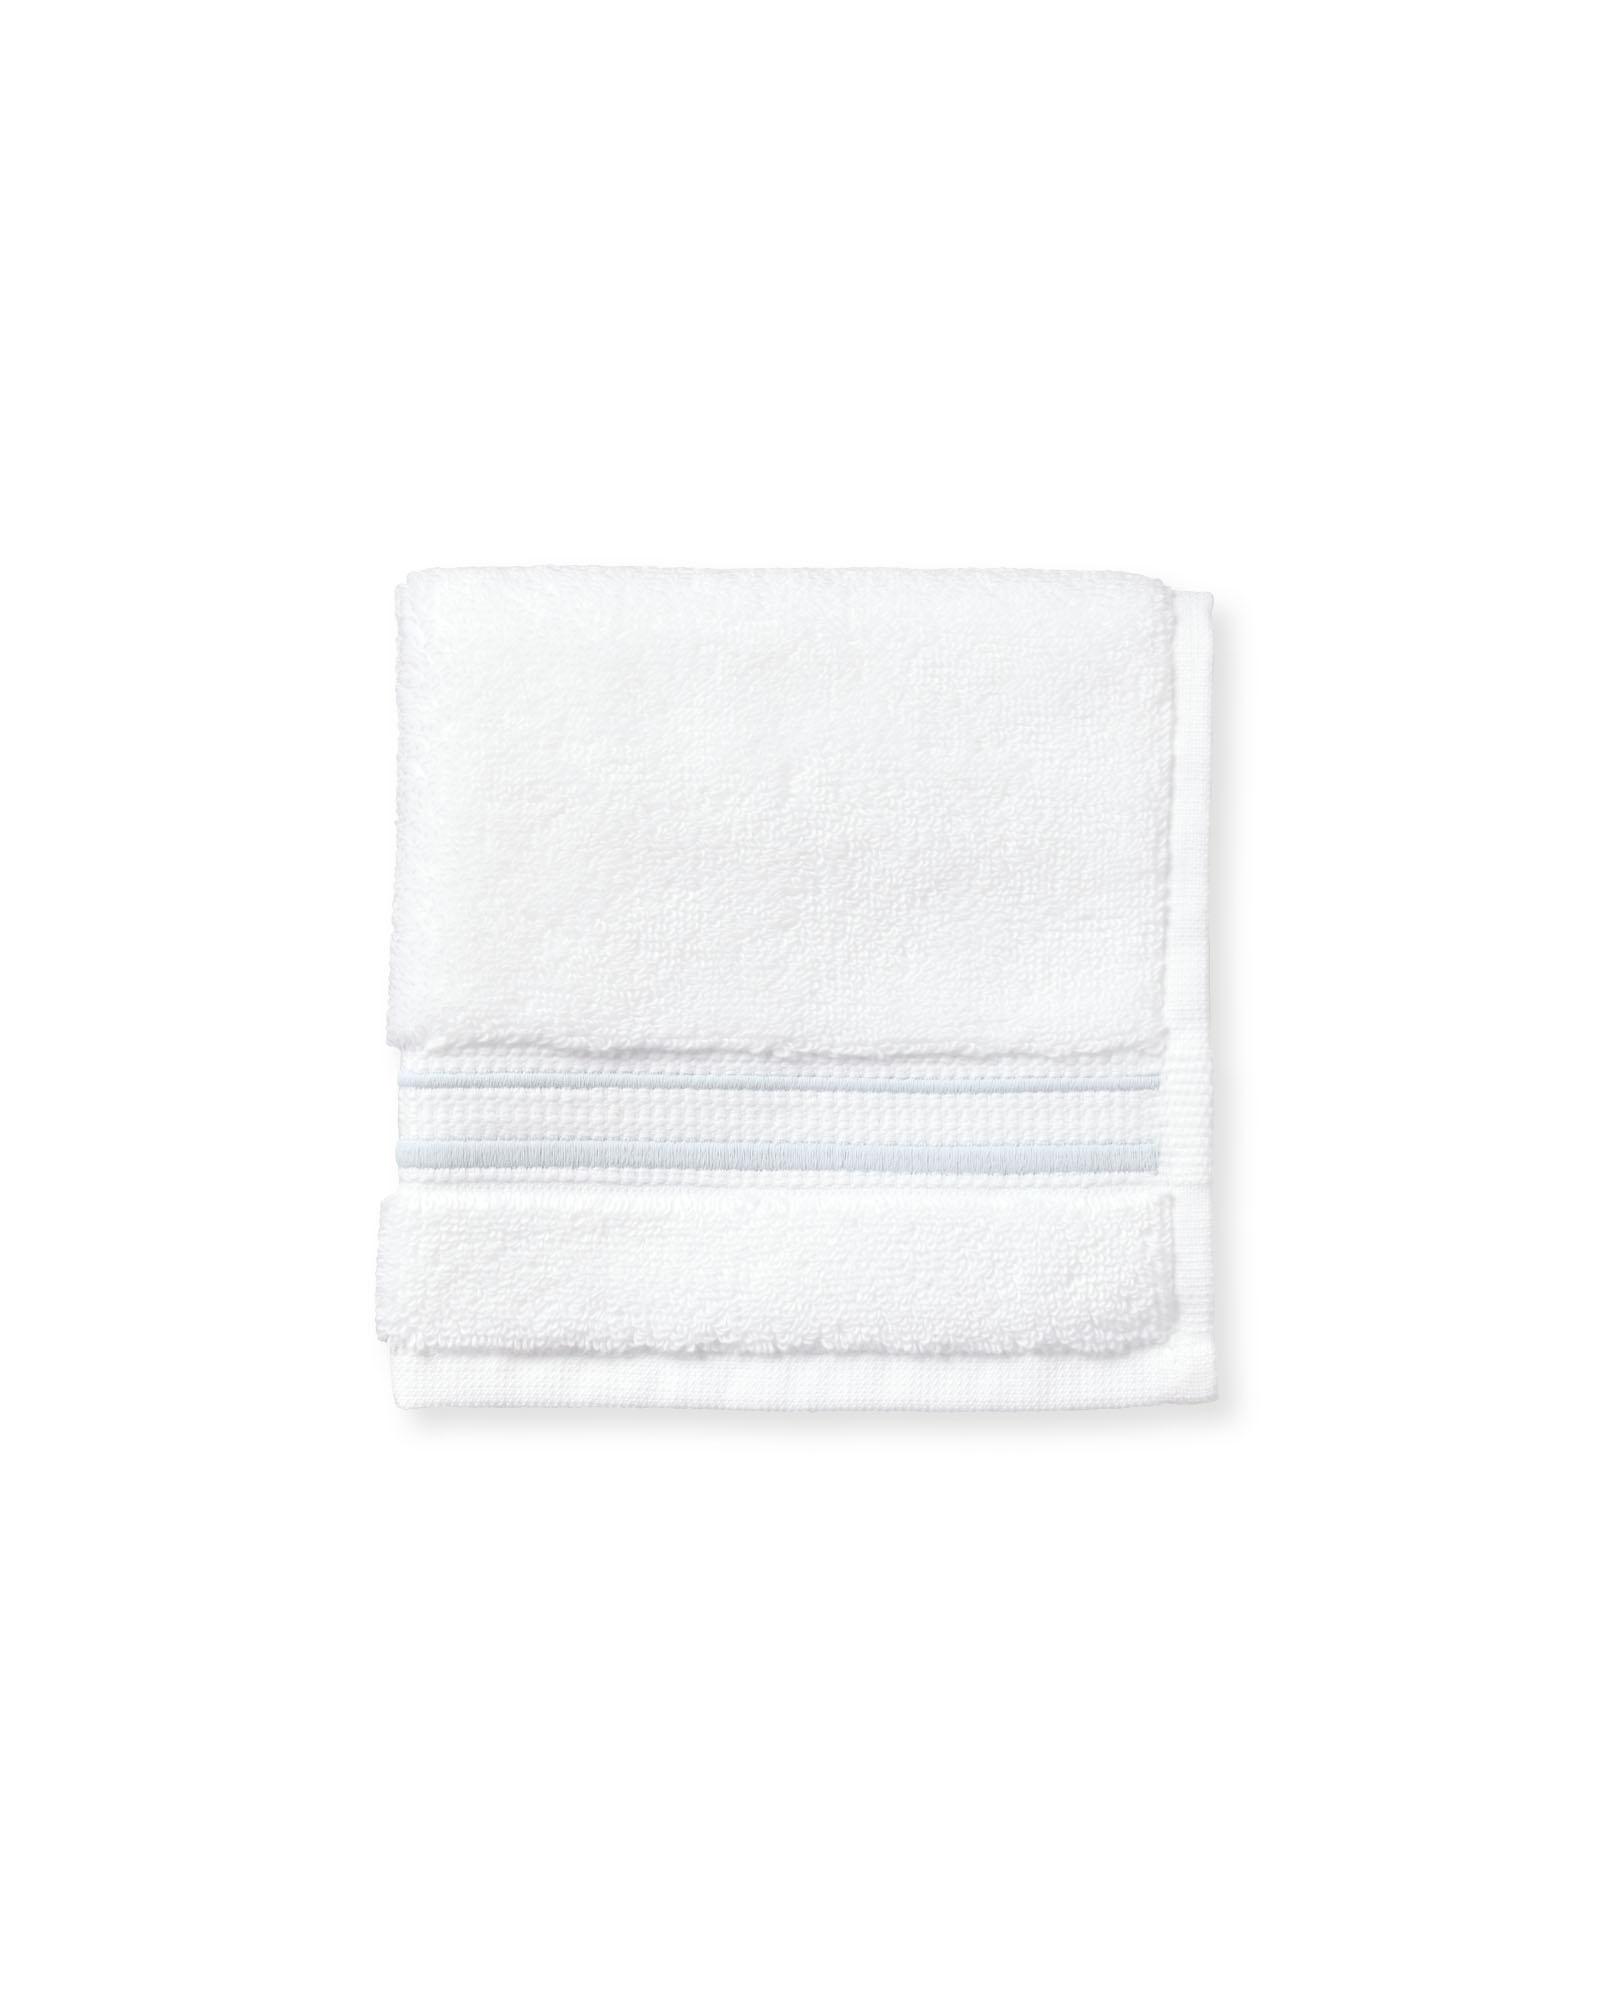 Buy Luxury Hotel Embroidered Bath Towel 100% Cotton,hotel